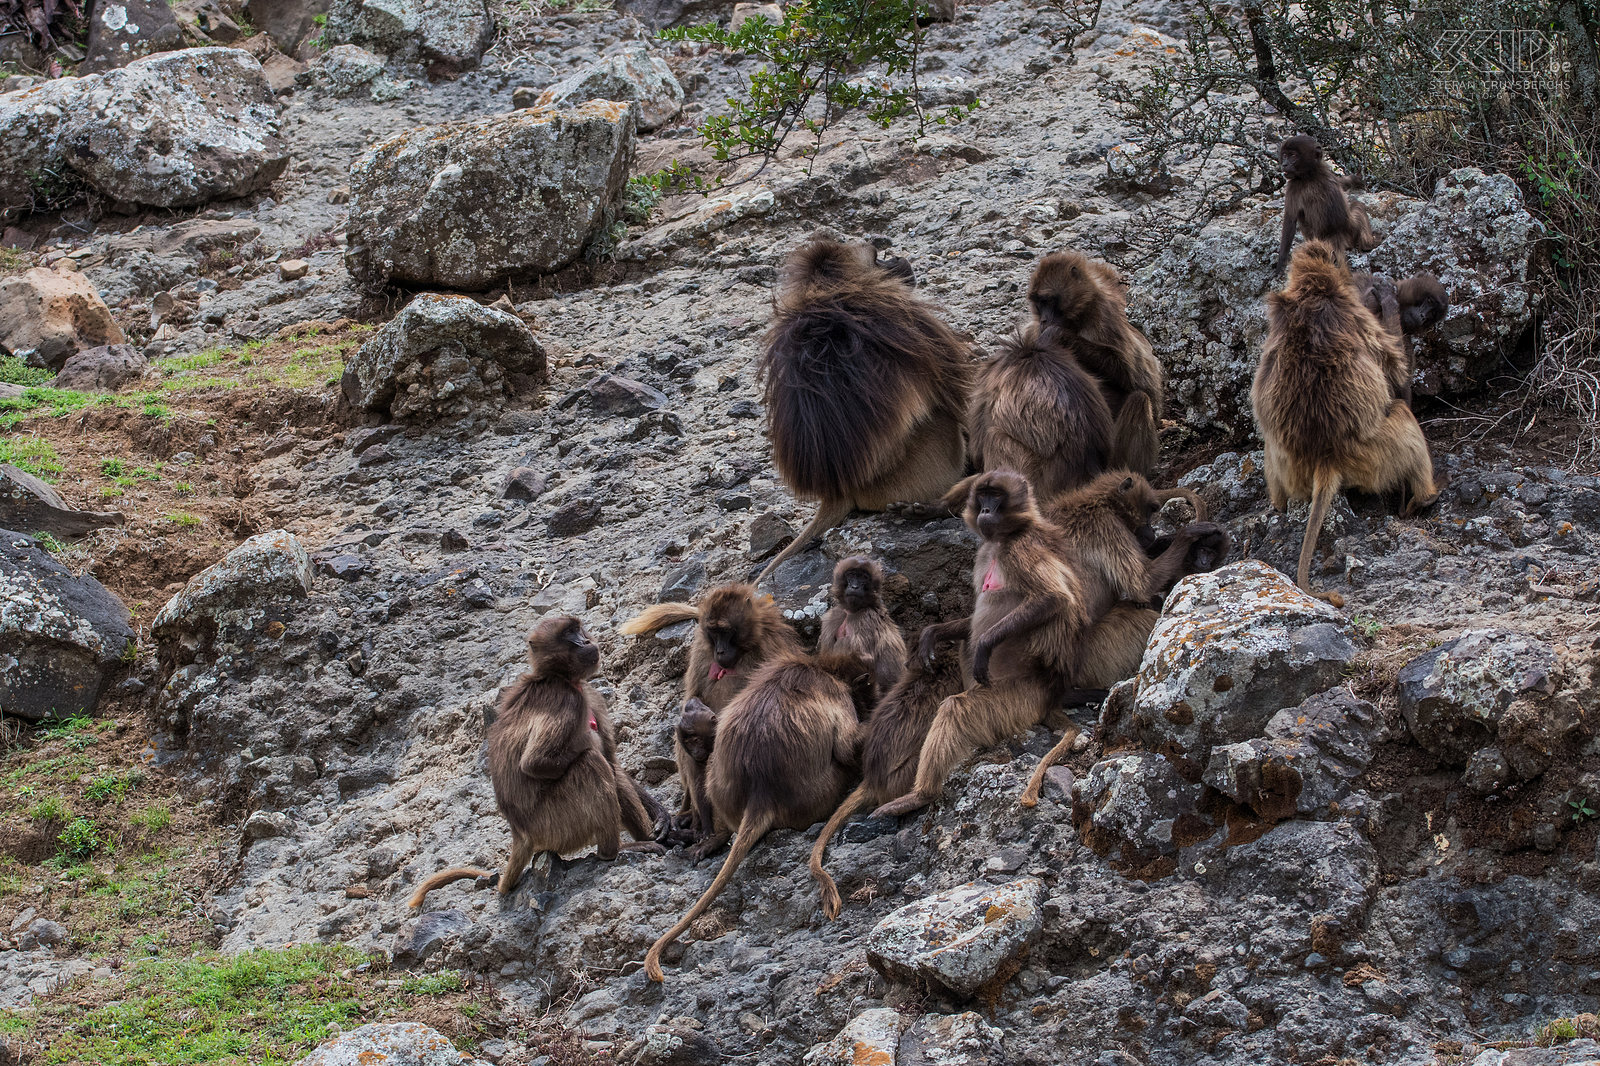 Debre Libanos - Geladas The last day we visited the Jemme River Gorge near Debre Libanos that is located north of Addis Abeba. Near the Portuguese Bridge we could observe various groups of the endemic and remarkable gelada baboons (Theropithecus gelada) Stefan Cruysberghs